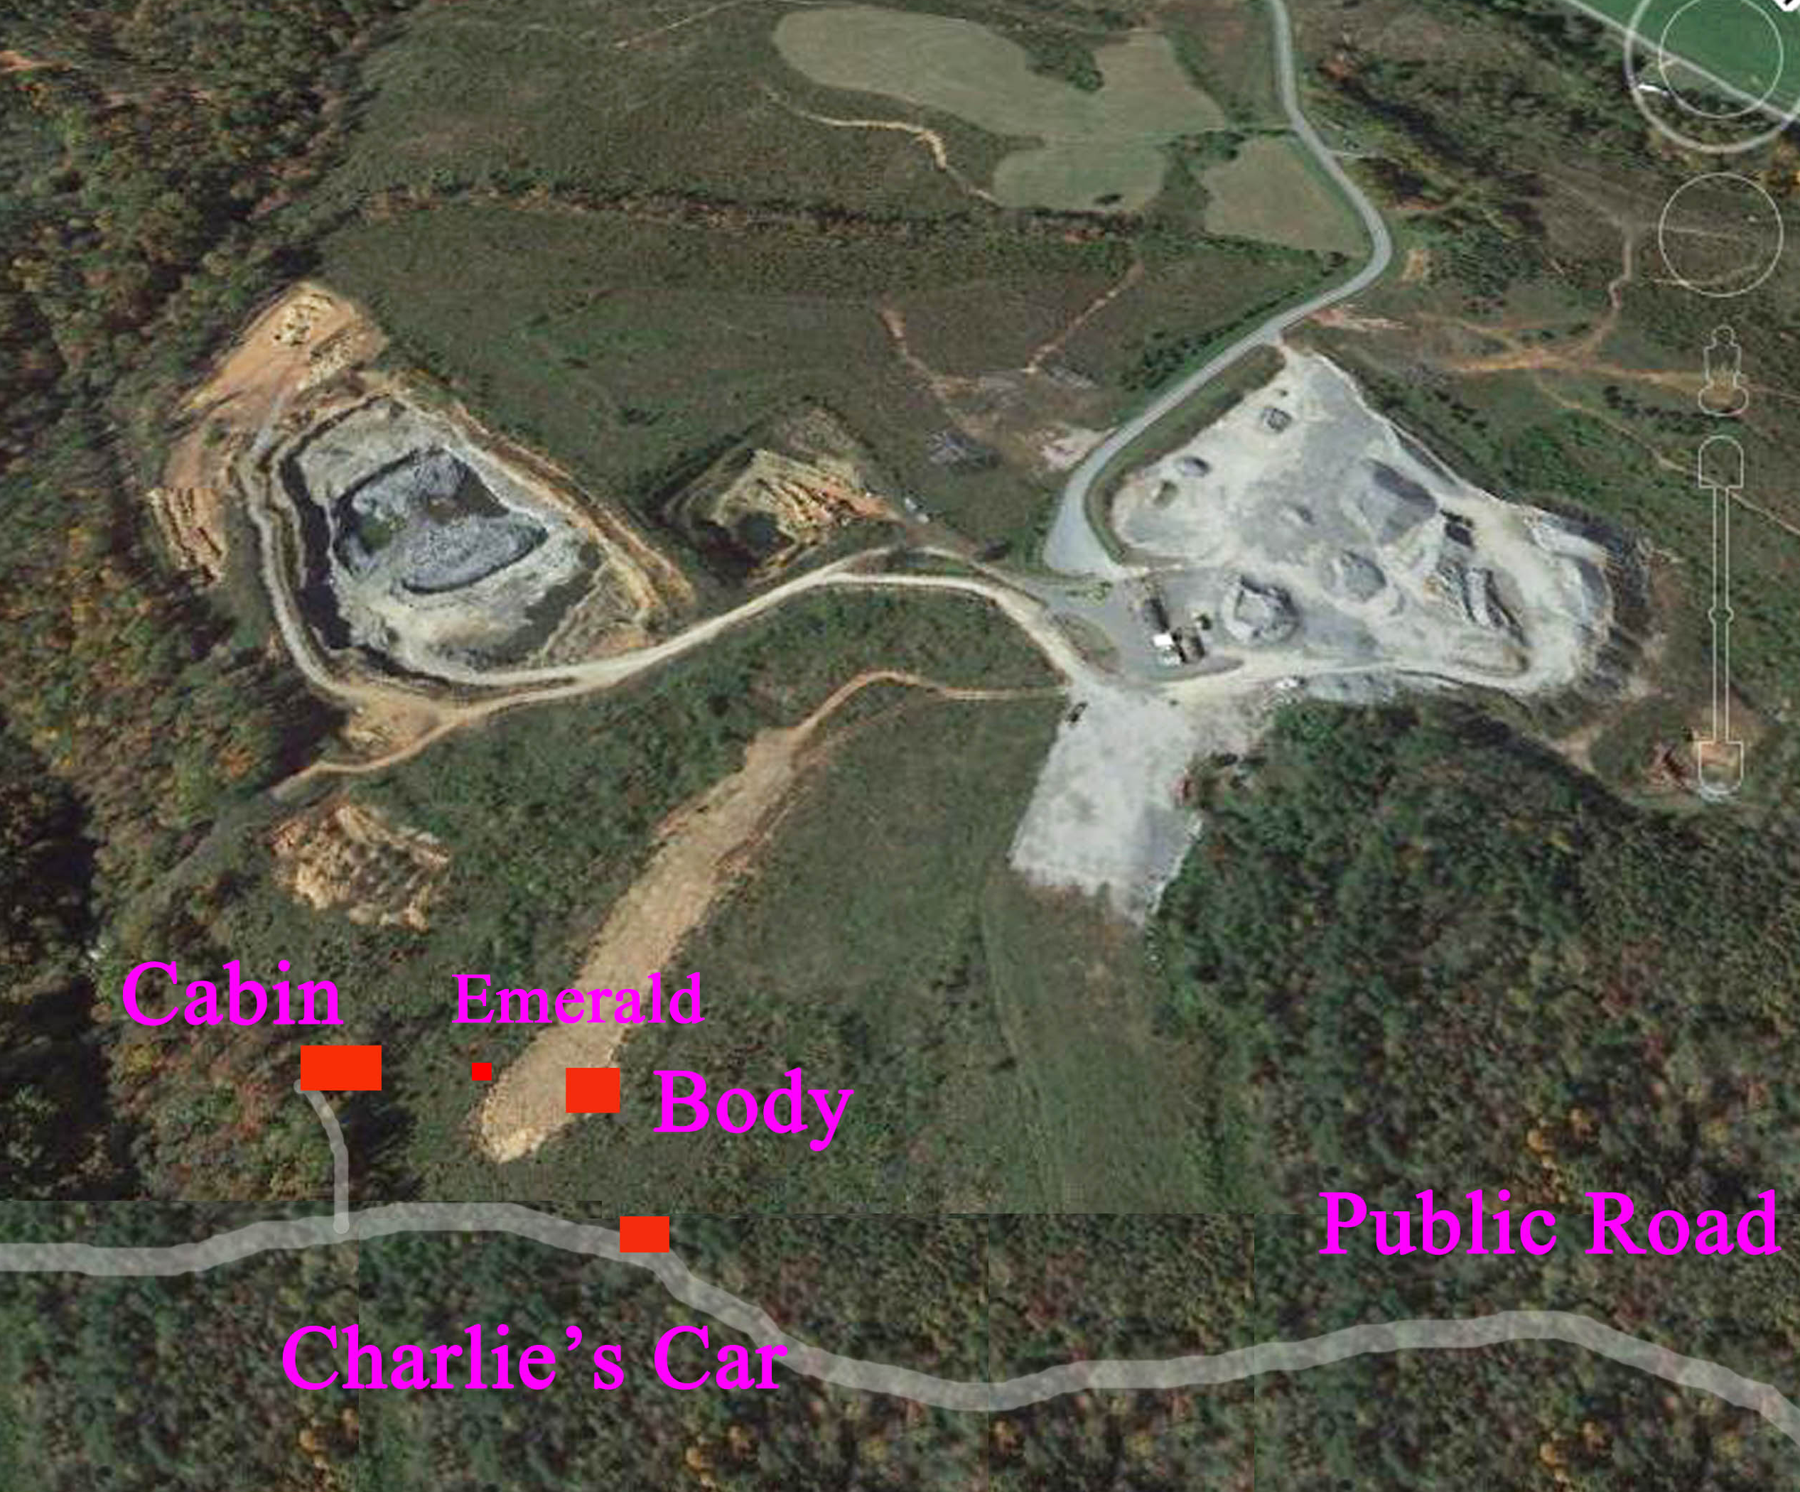 Adding fictional elements to a real photo of a North Carolina emerald mine.